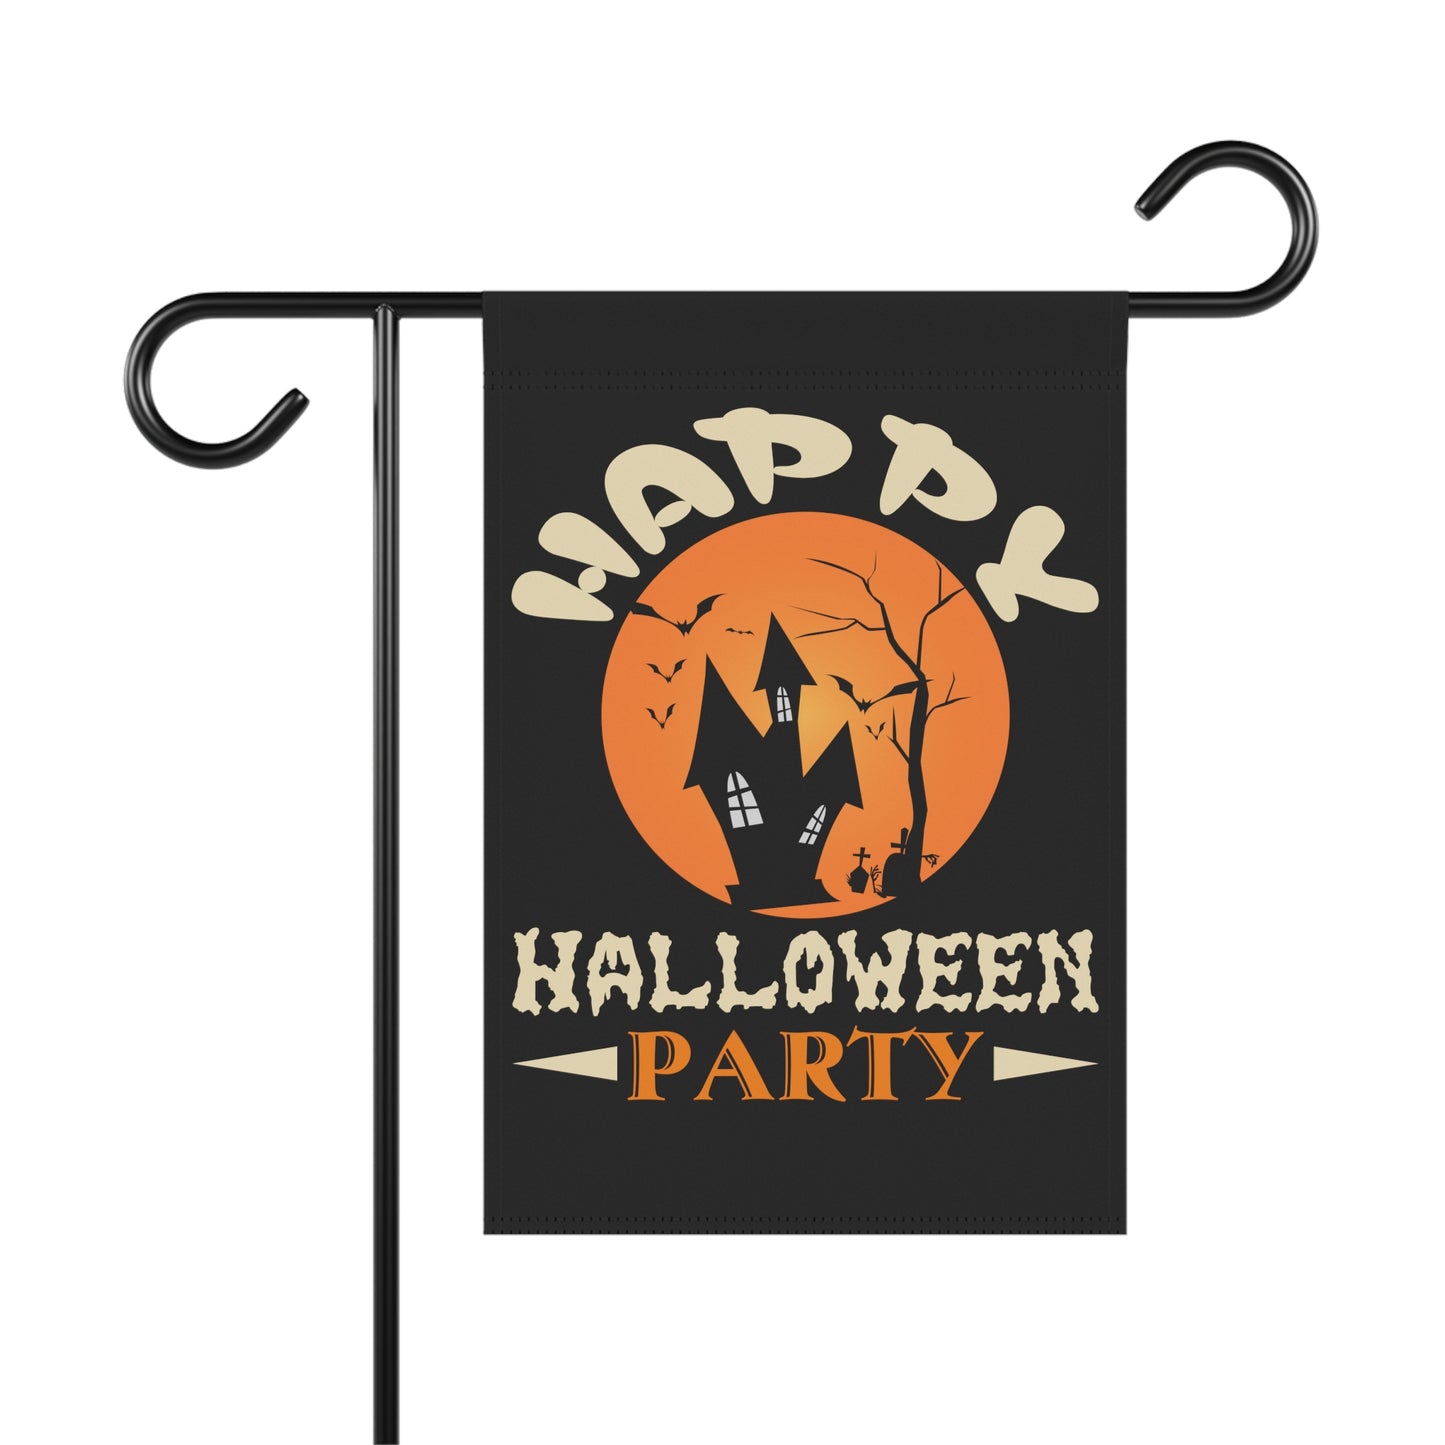 Happy Halloween Party Banner To Let the Ghouls Know Where It's At